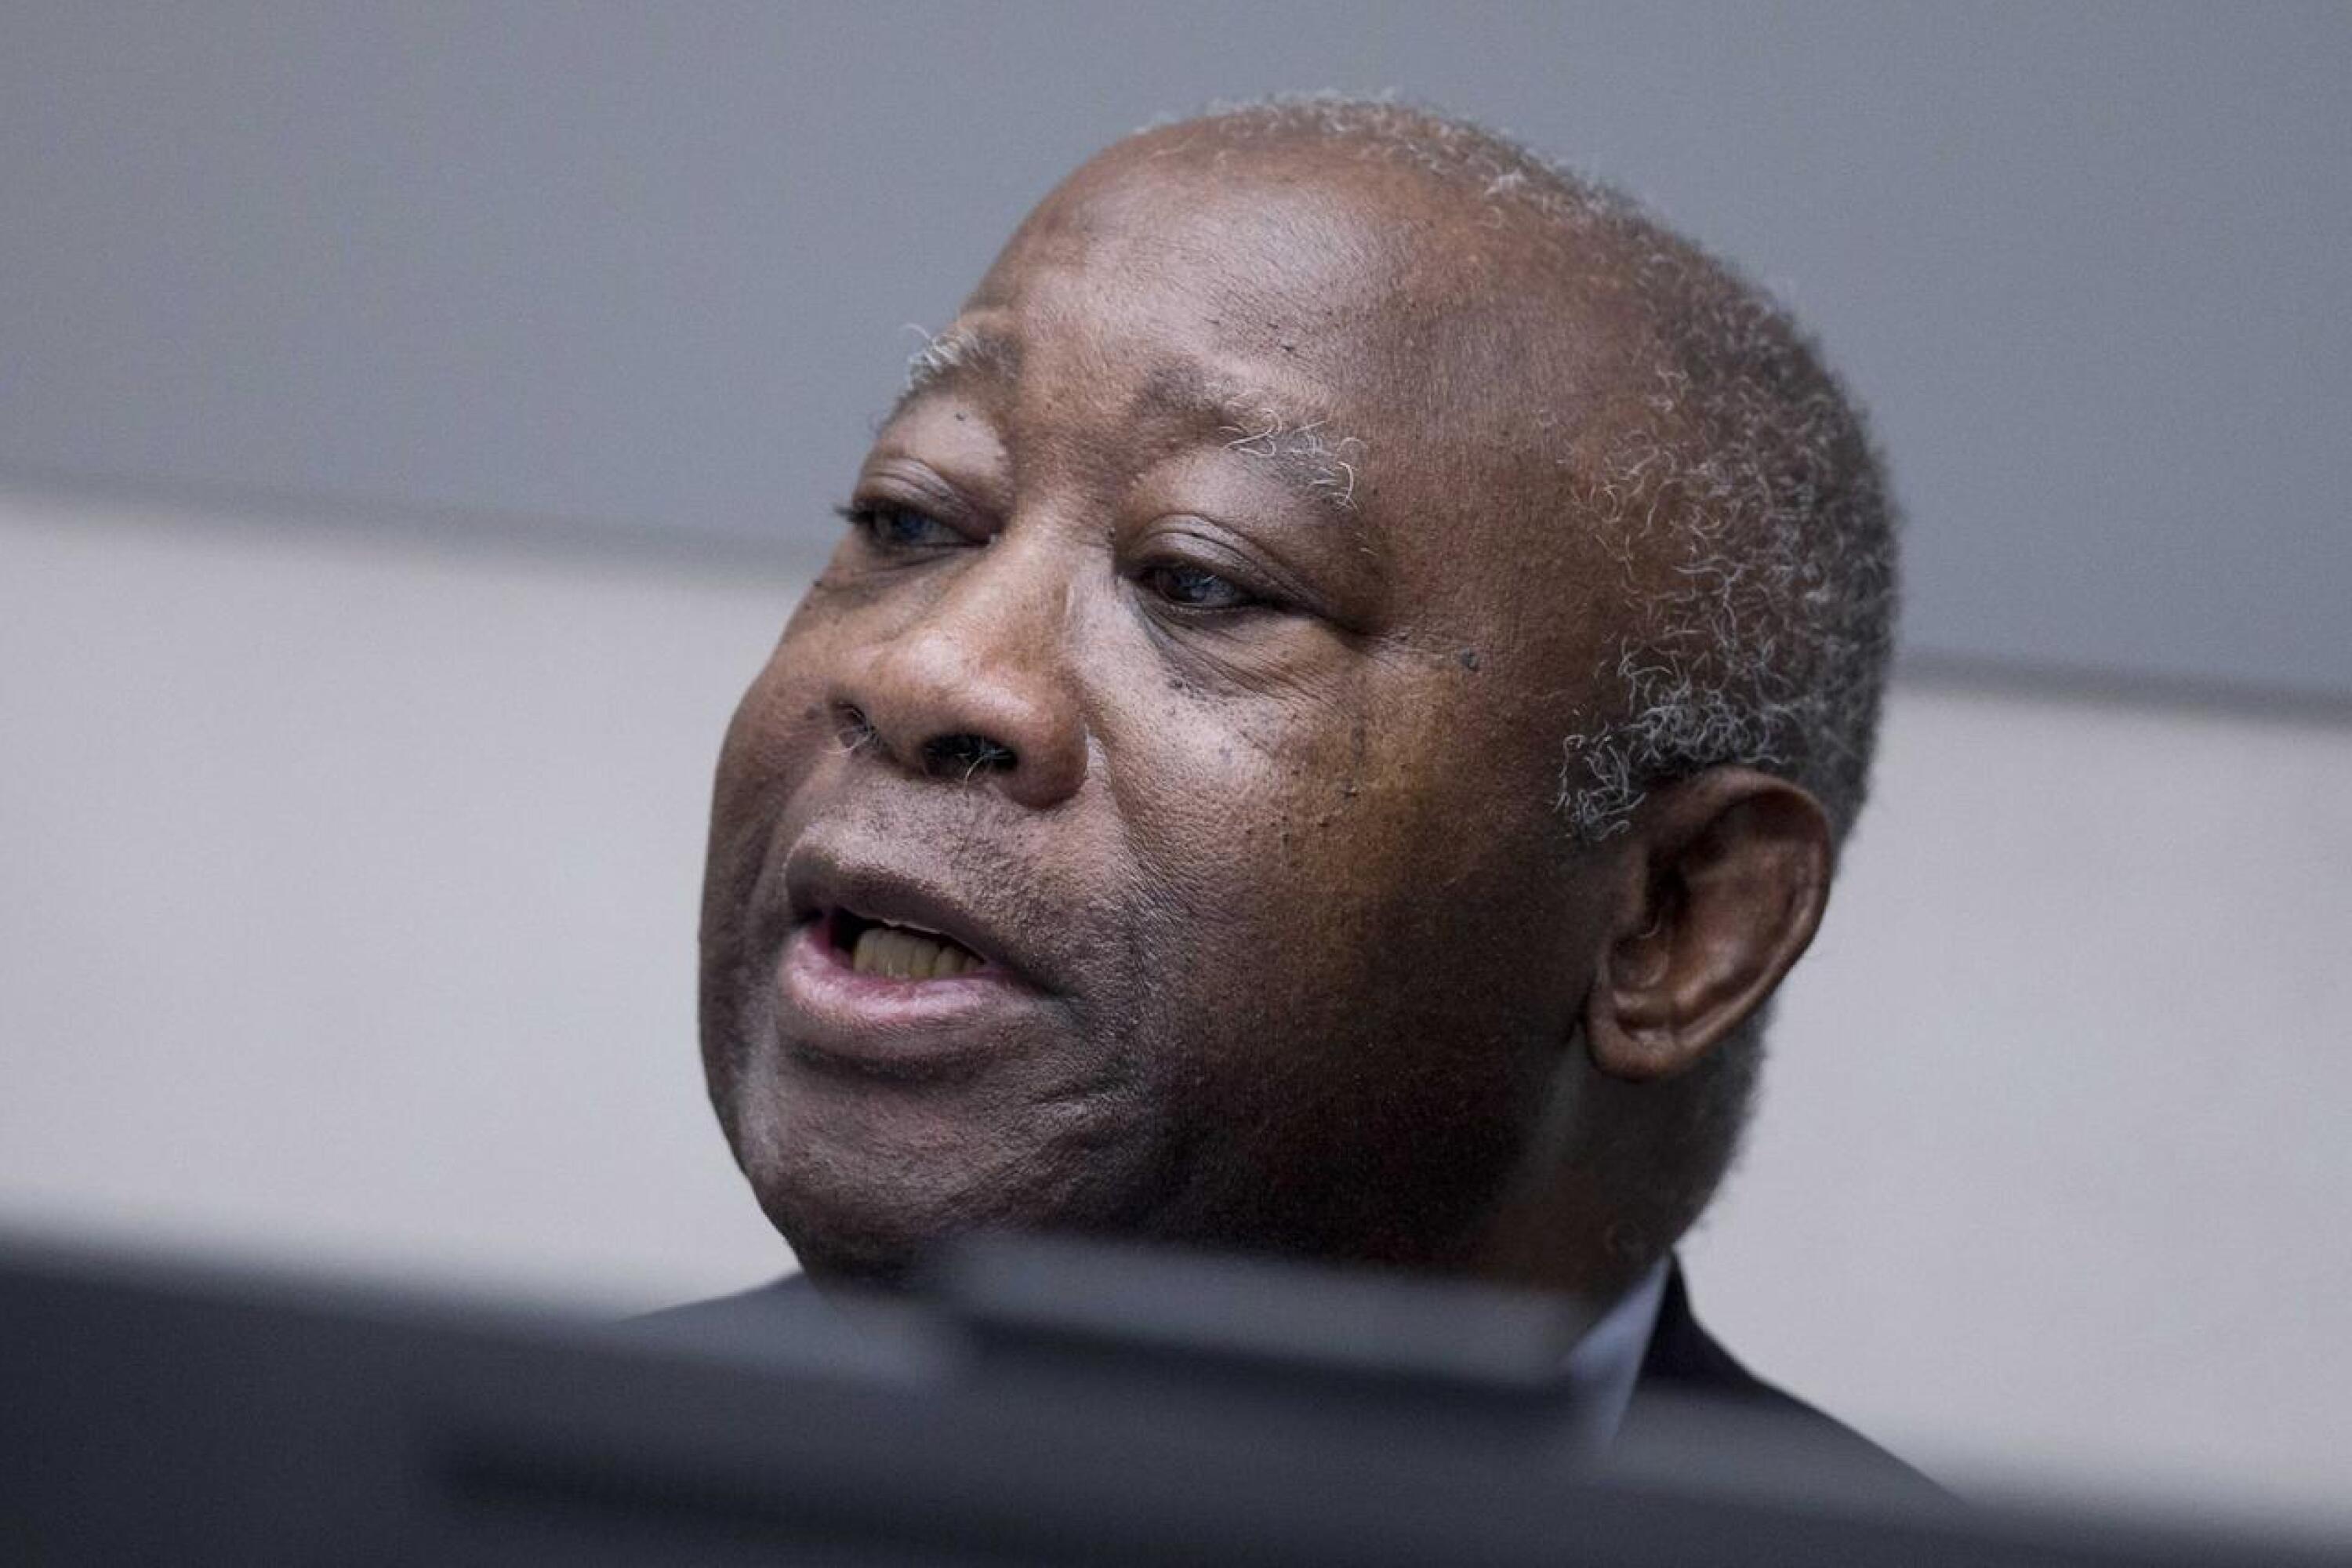 Ivory Coast president pardons predecessor Gbagbo to boost “social cohesion”